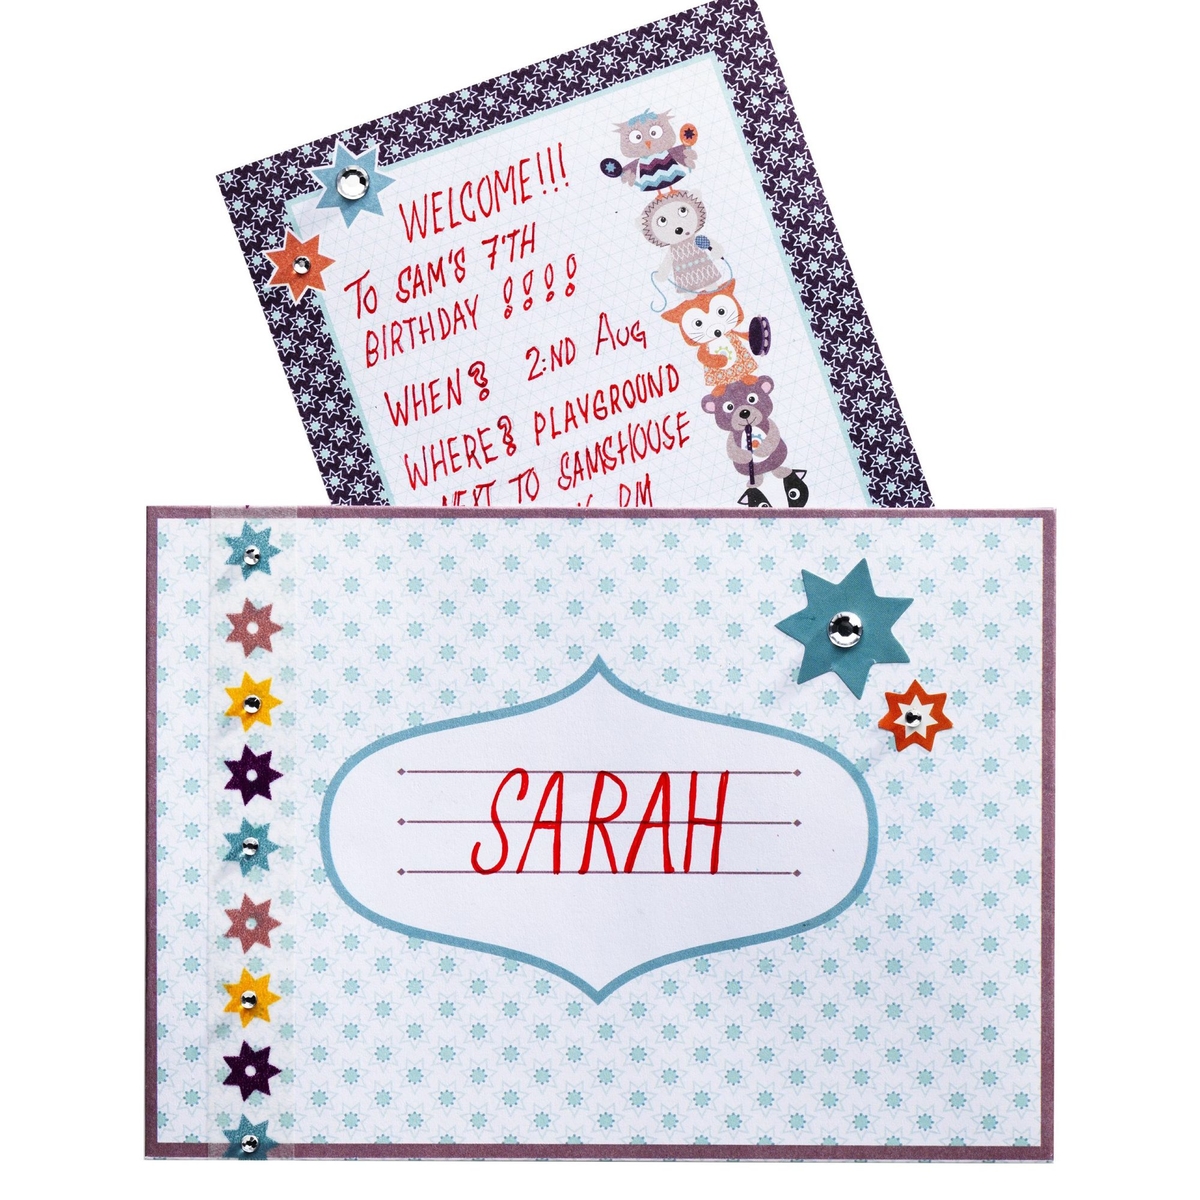 Party-perfect invitations